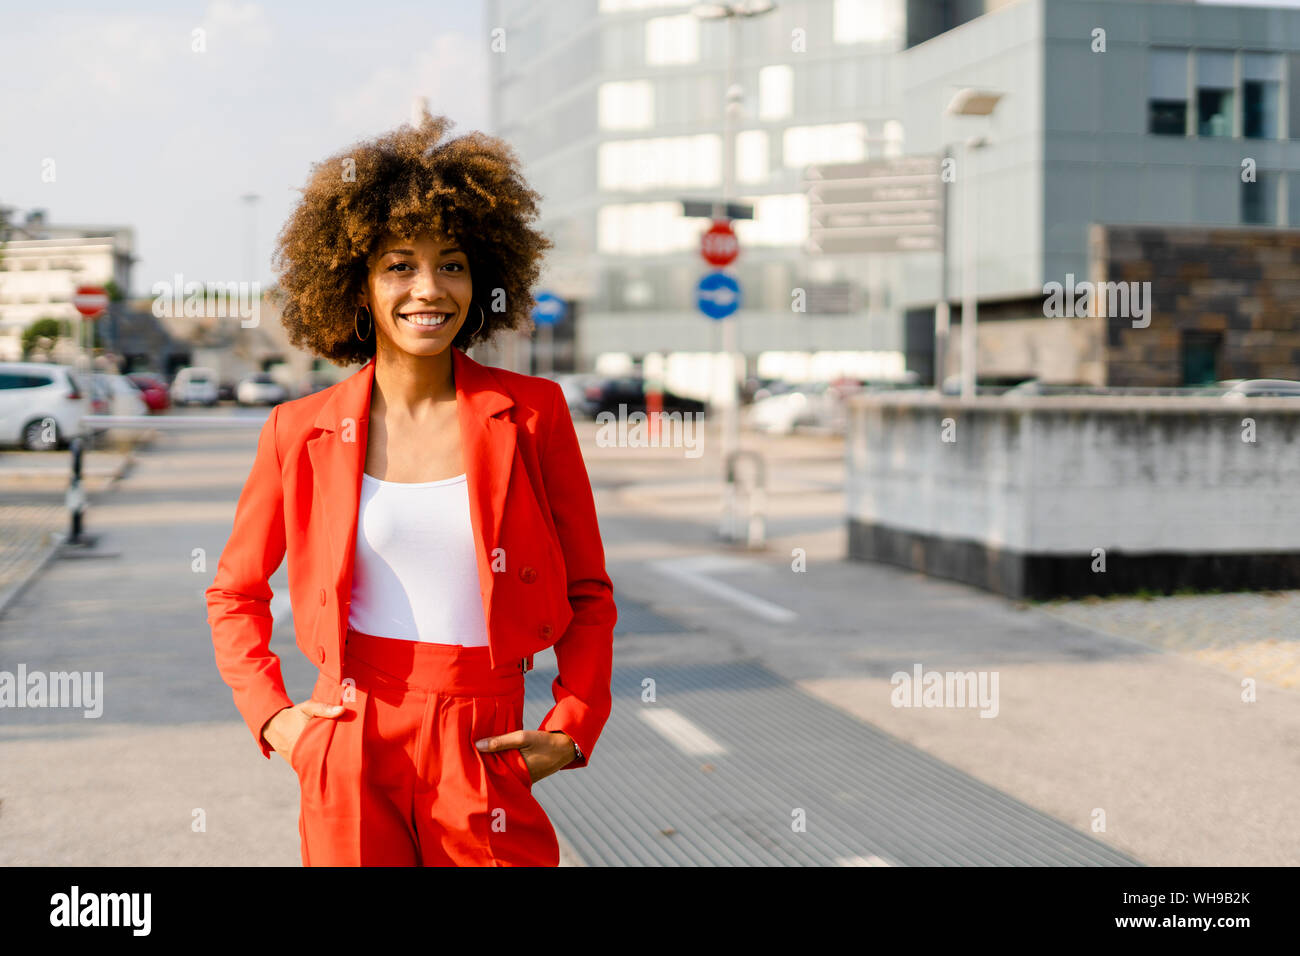 Portrait of smiling young woman wearing fashionable red pantsuit Stock Photo